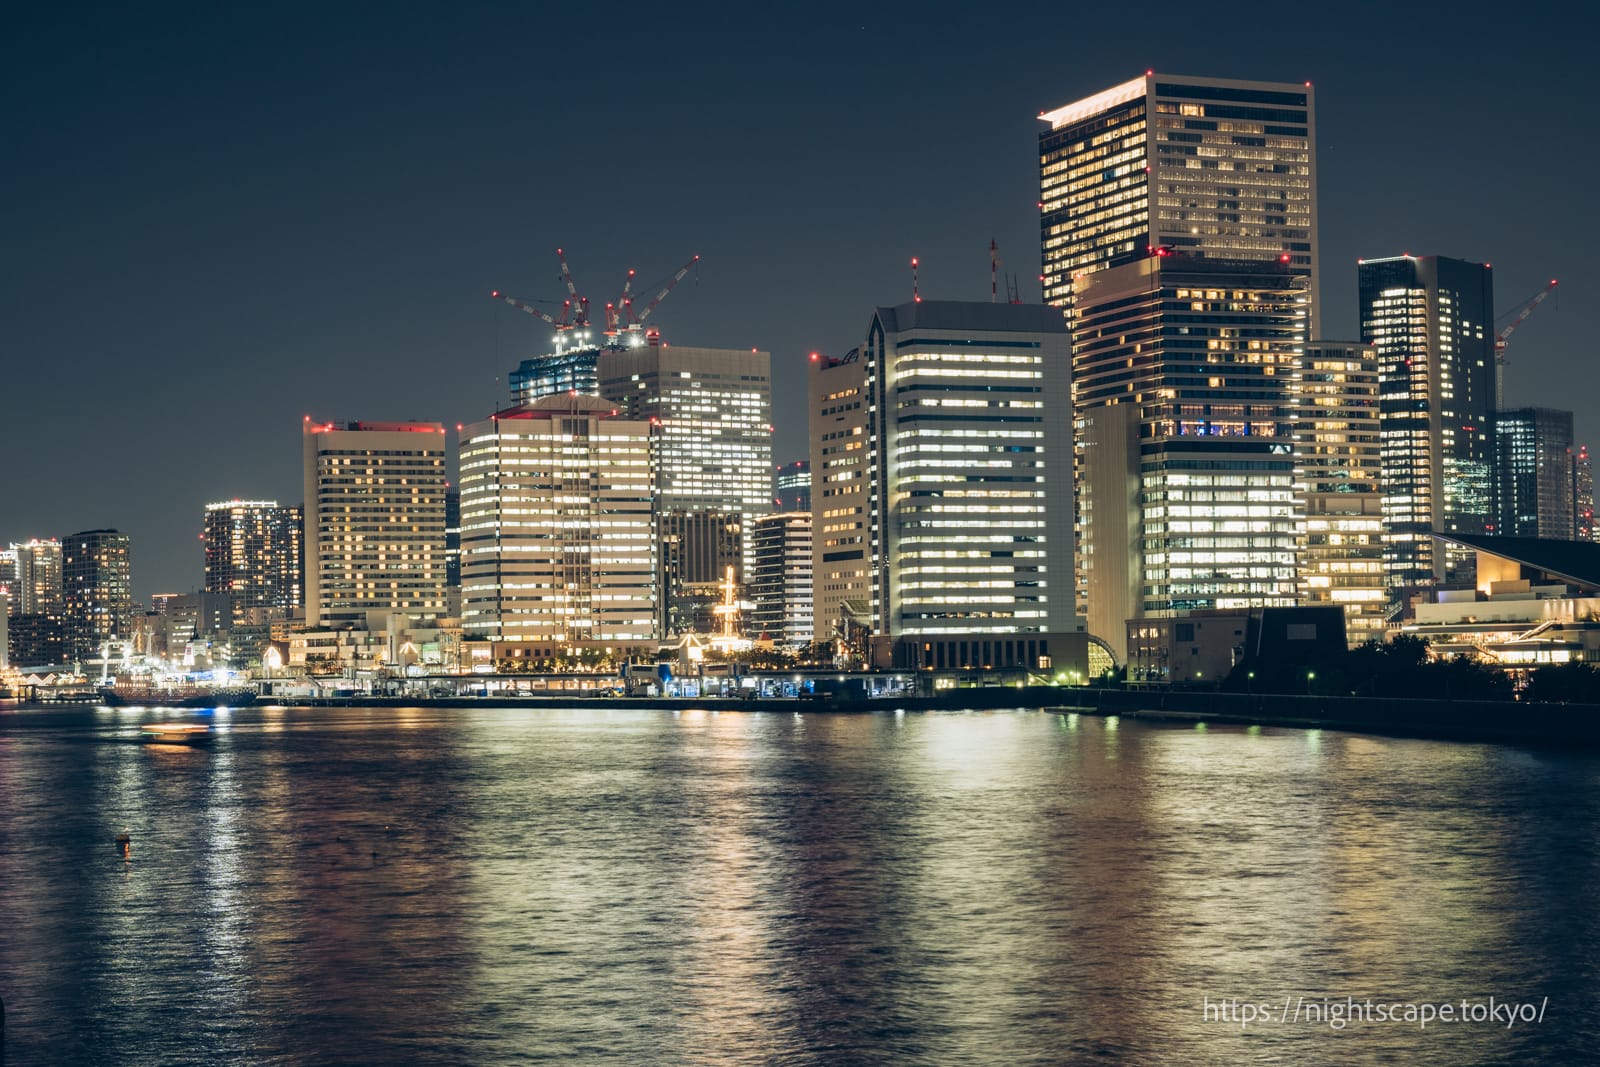 Night view of buildings in the direction of Hamamatsucho from the Tsukiji Bridge.